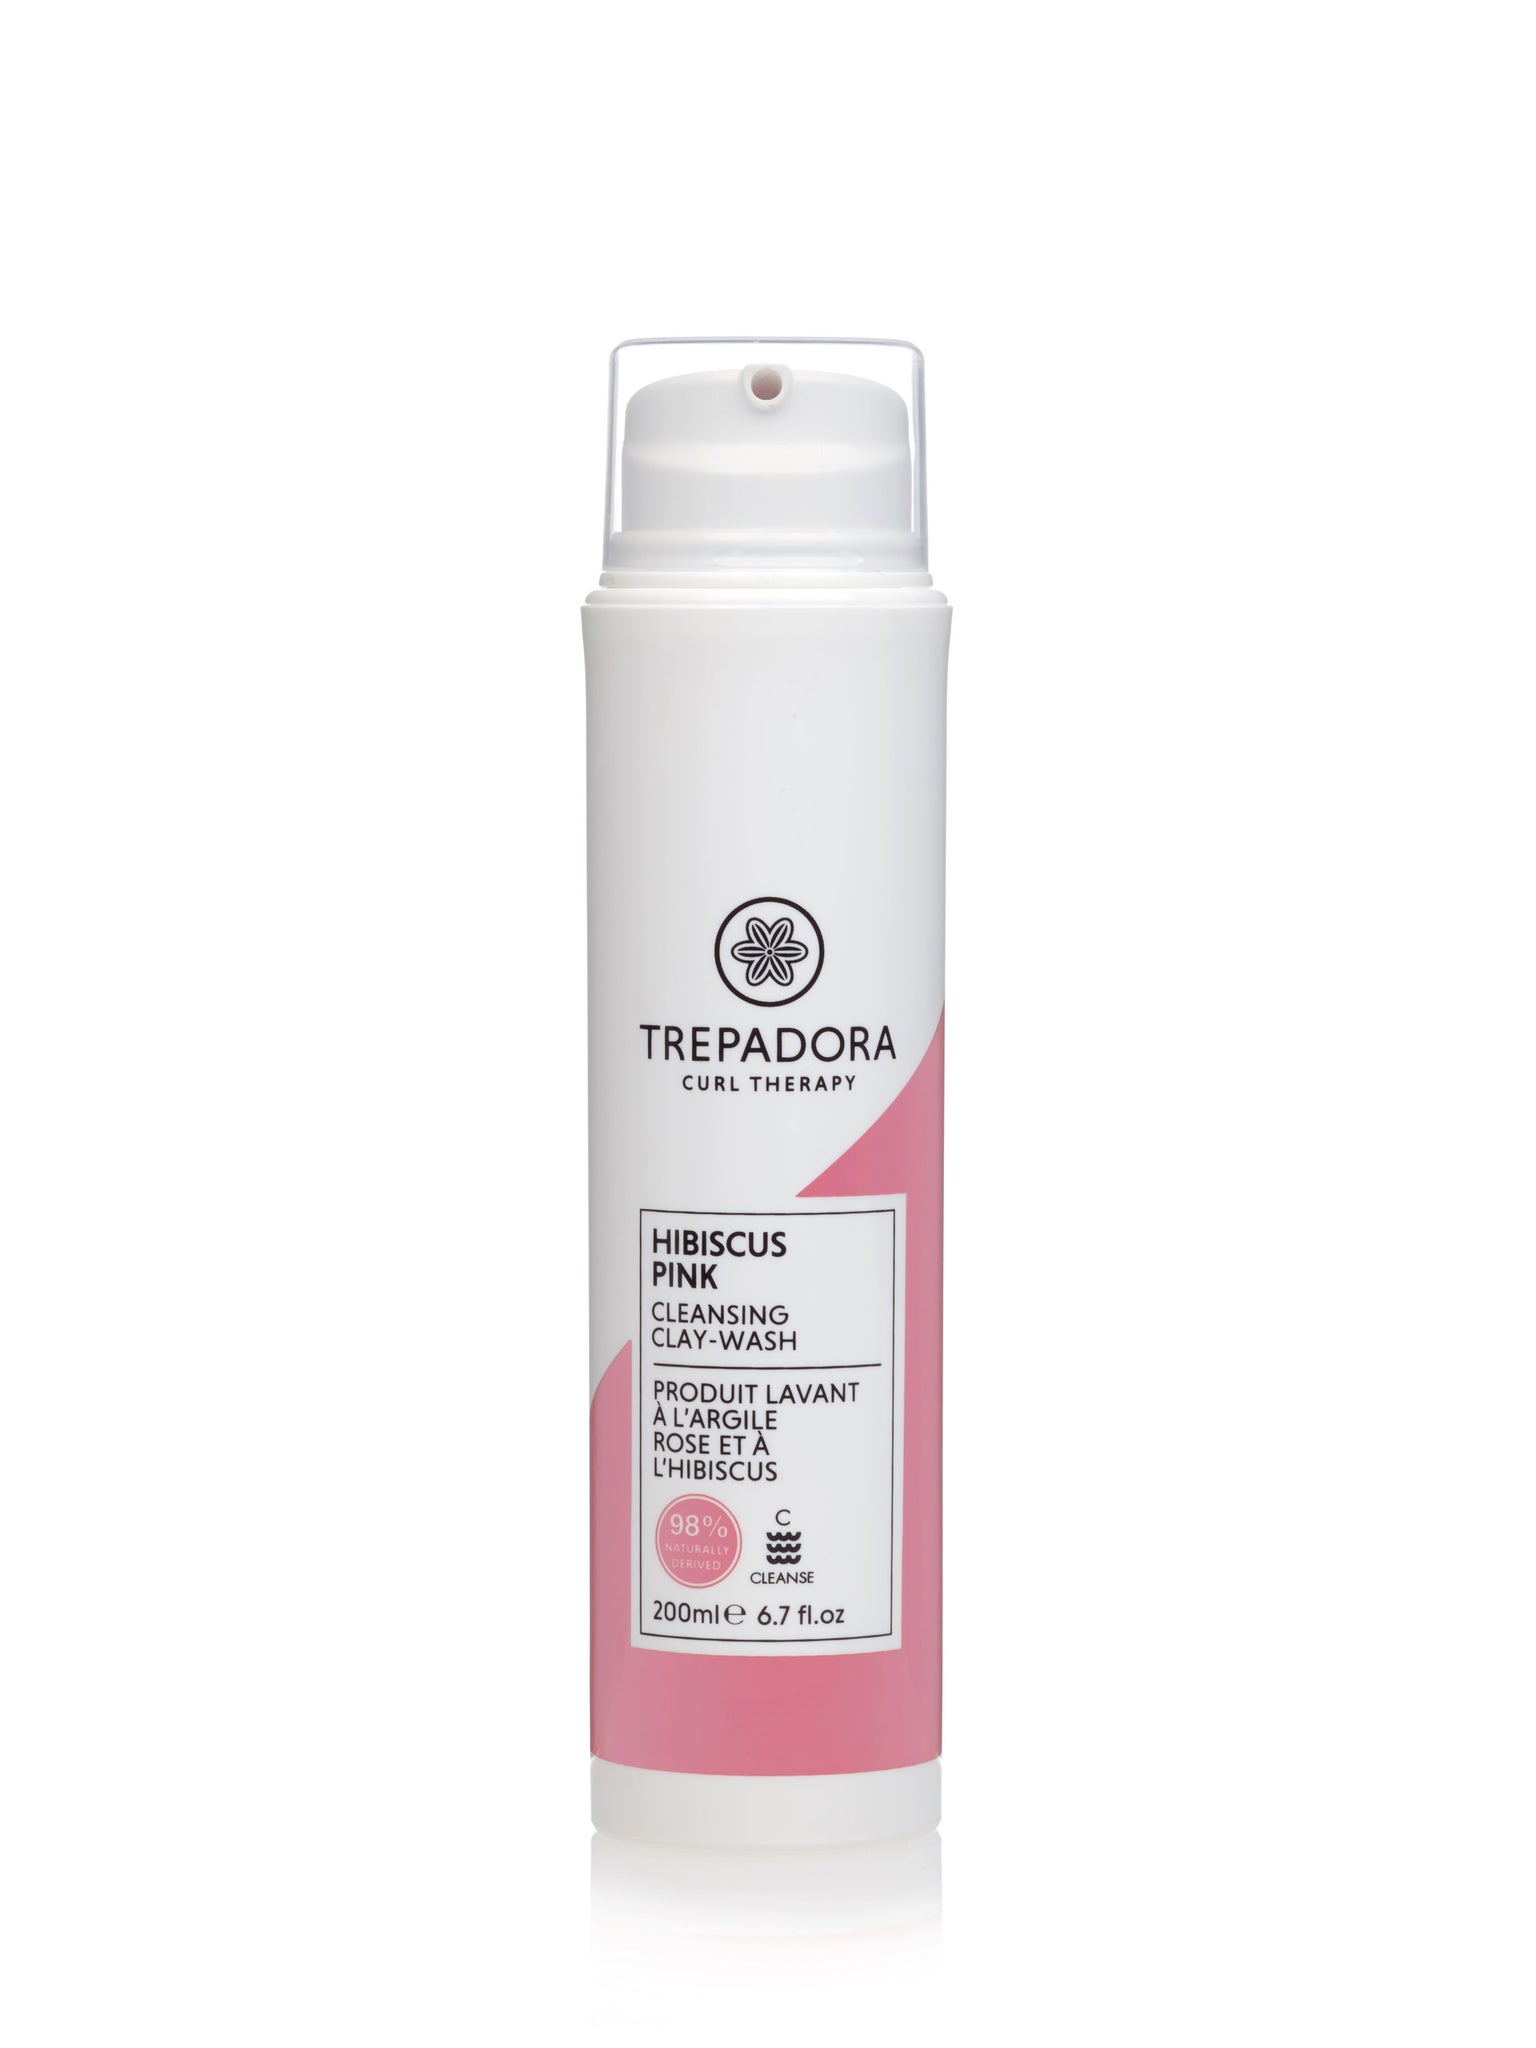 Trepadora Hibiscus Cleansing Clay Wash 200ml - Product Junkie DC